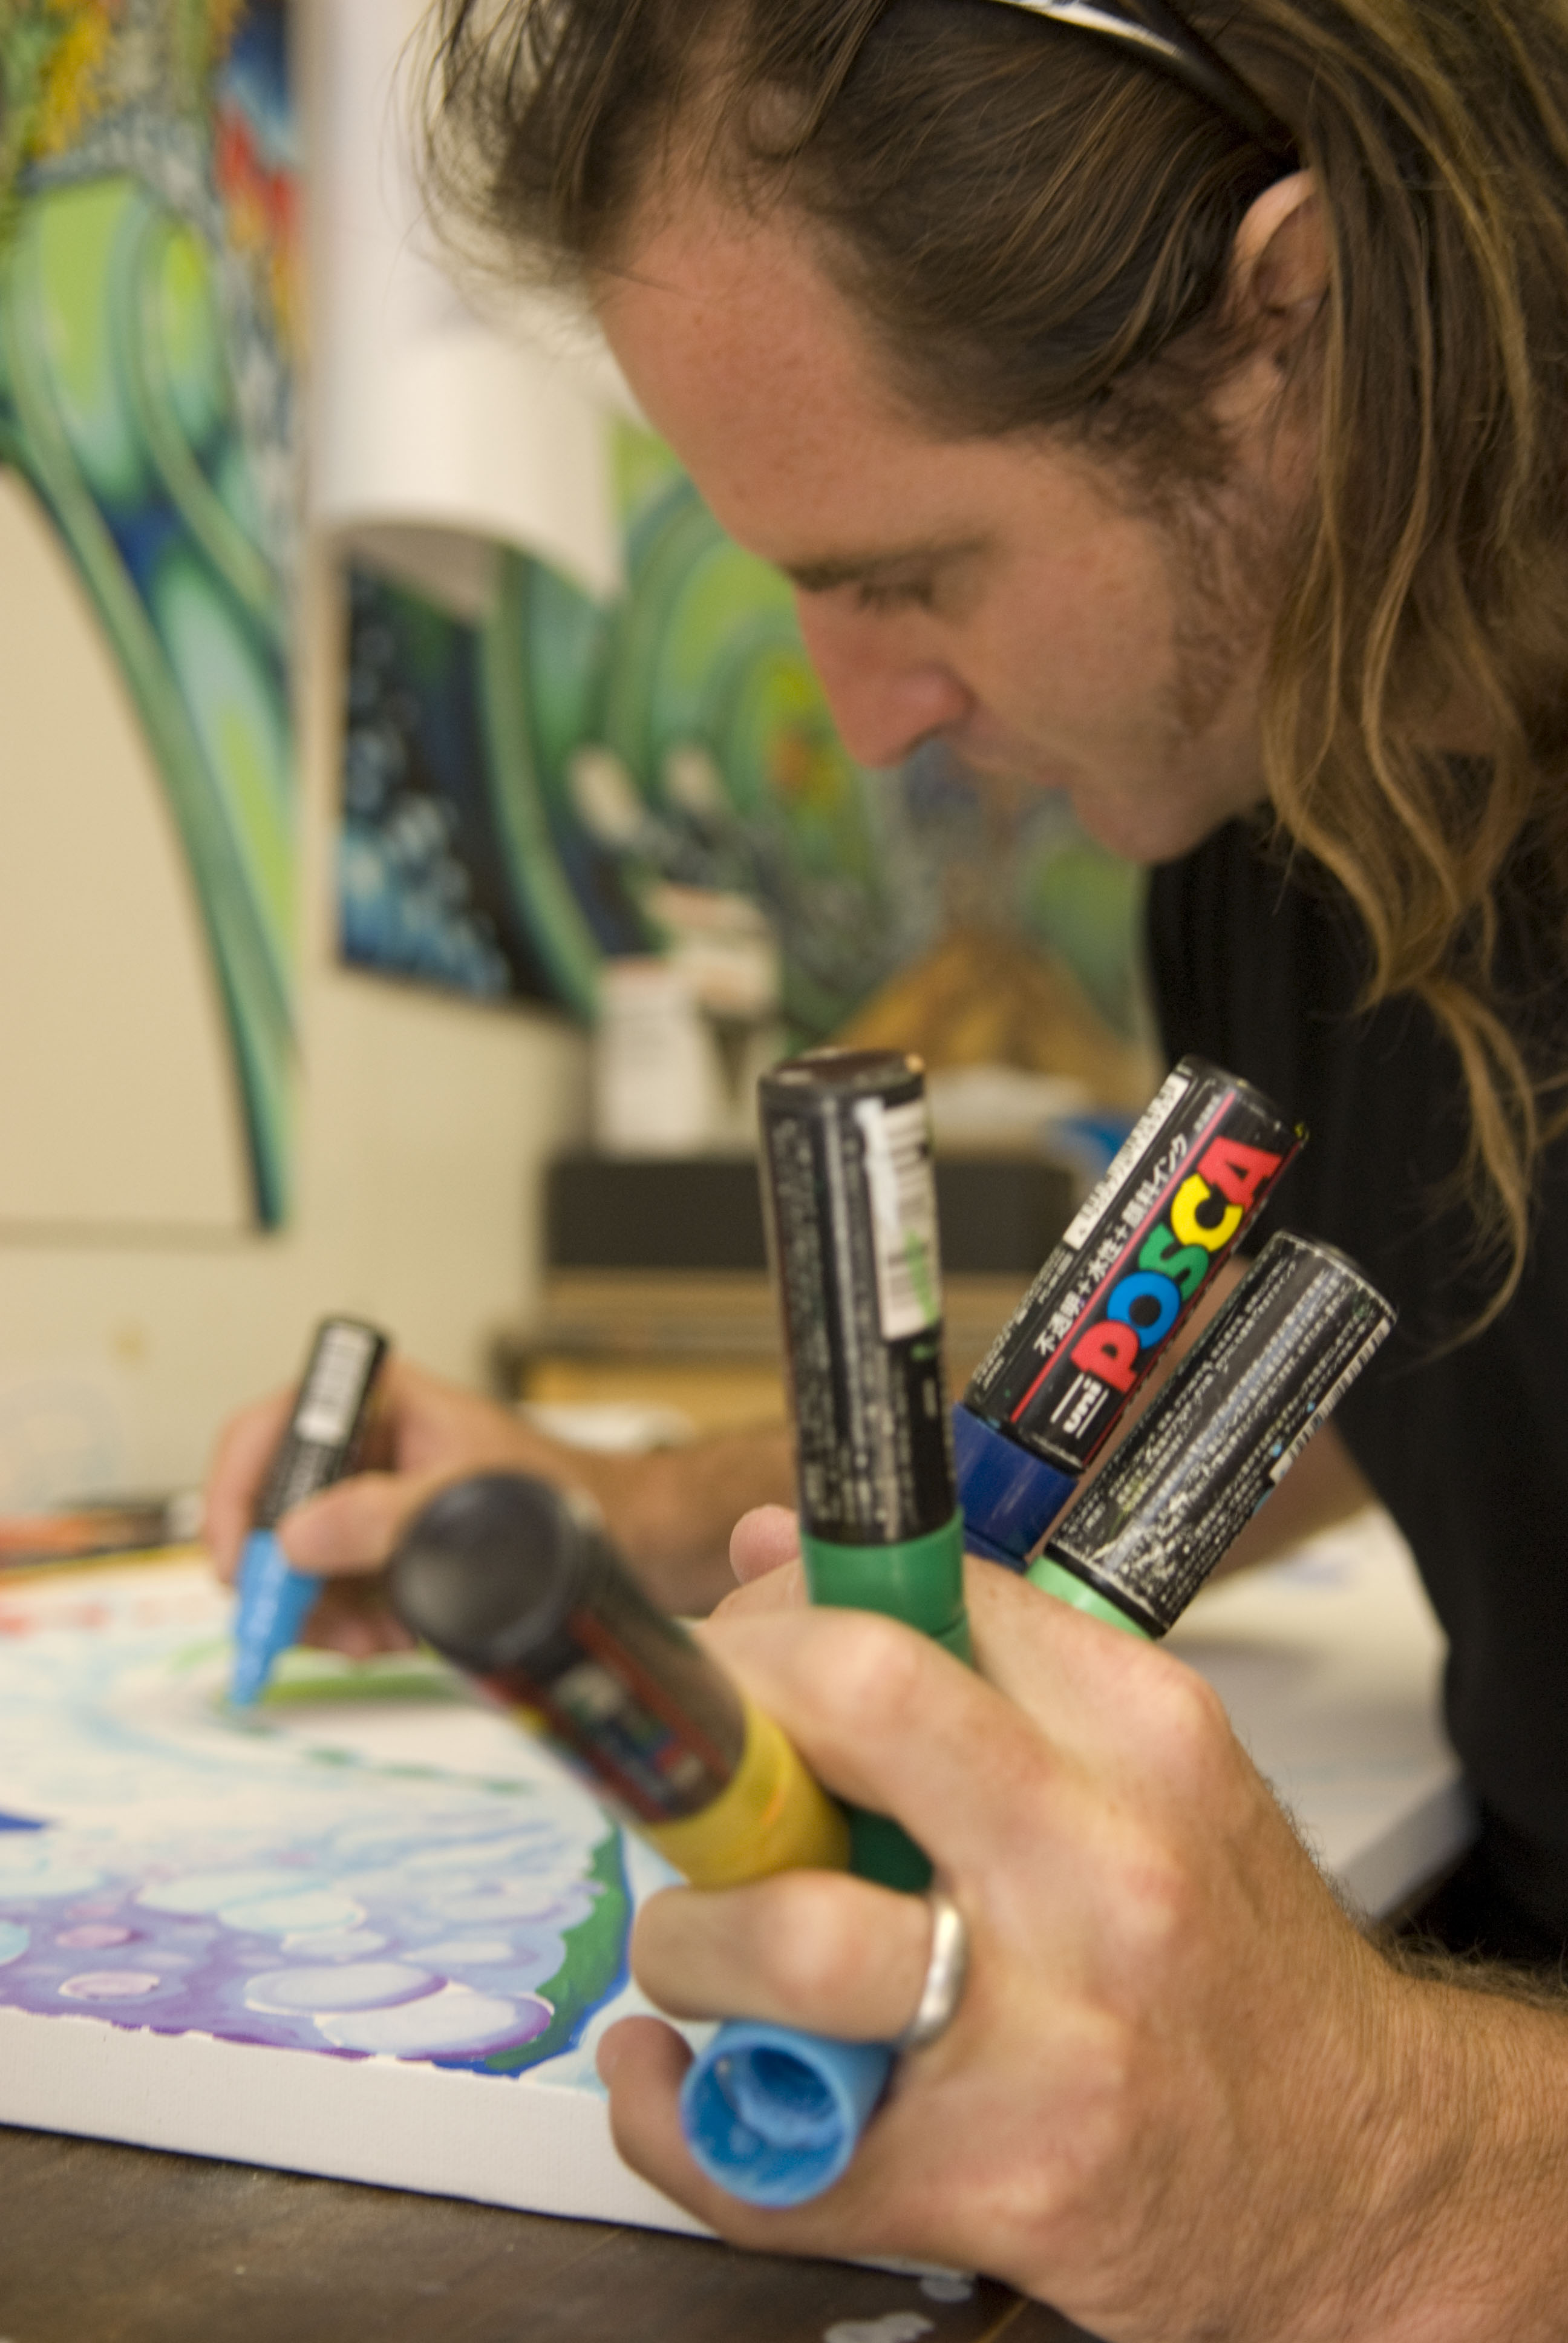 Drew Brophy and his Paint Pens. Photo by Aaron Bickford